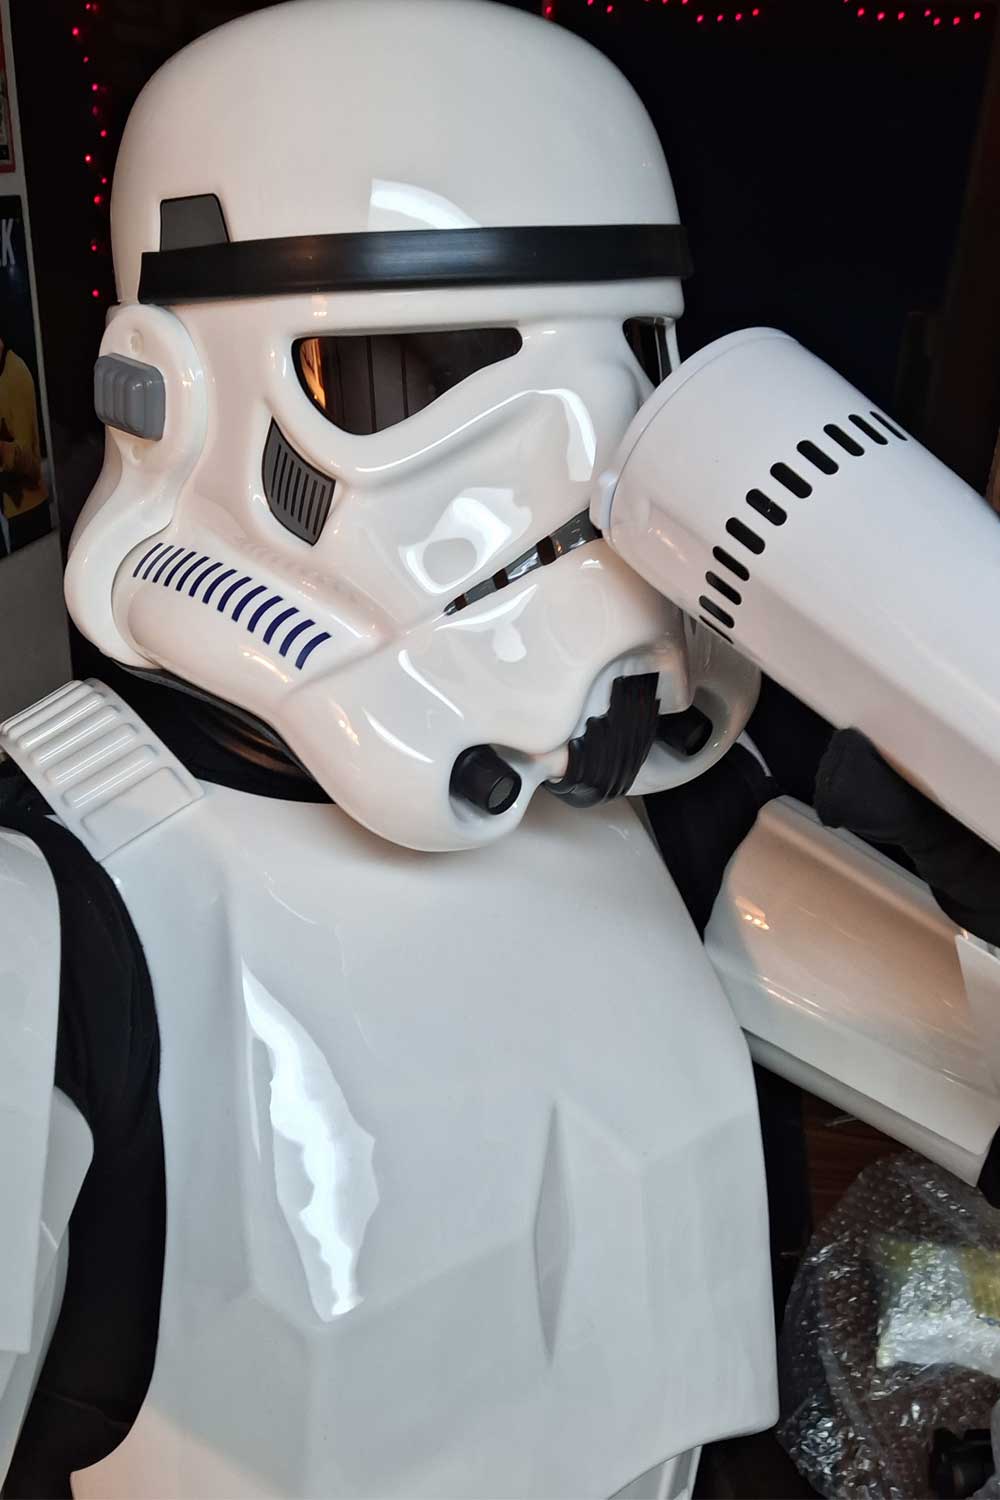 Stormtrooper armour review from Chris